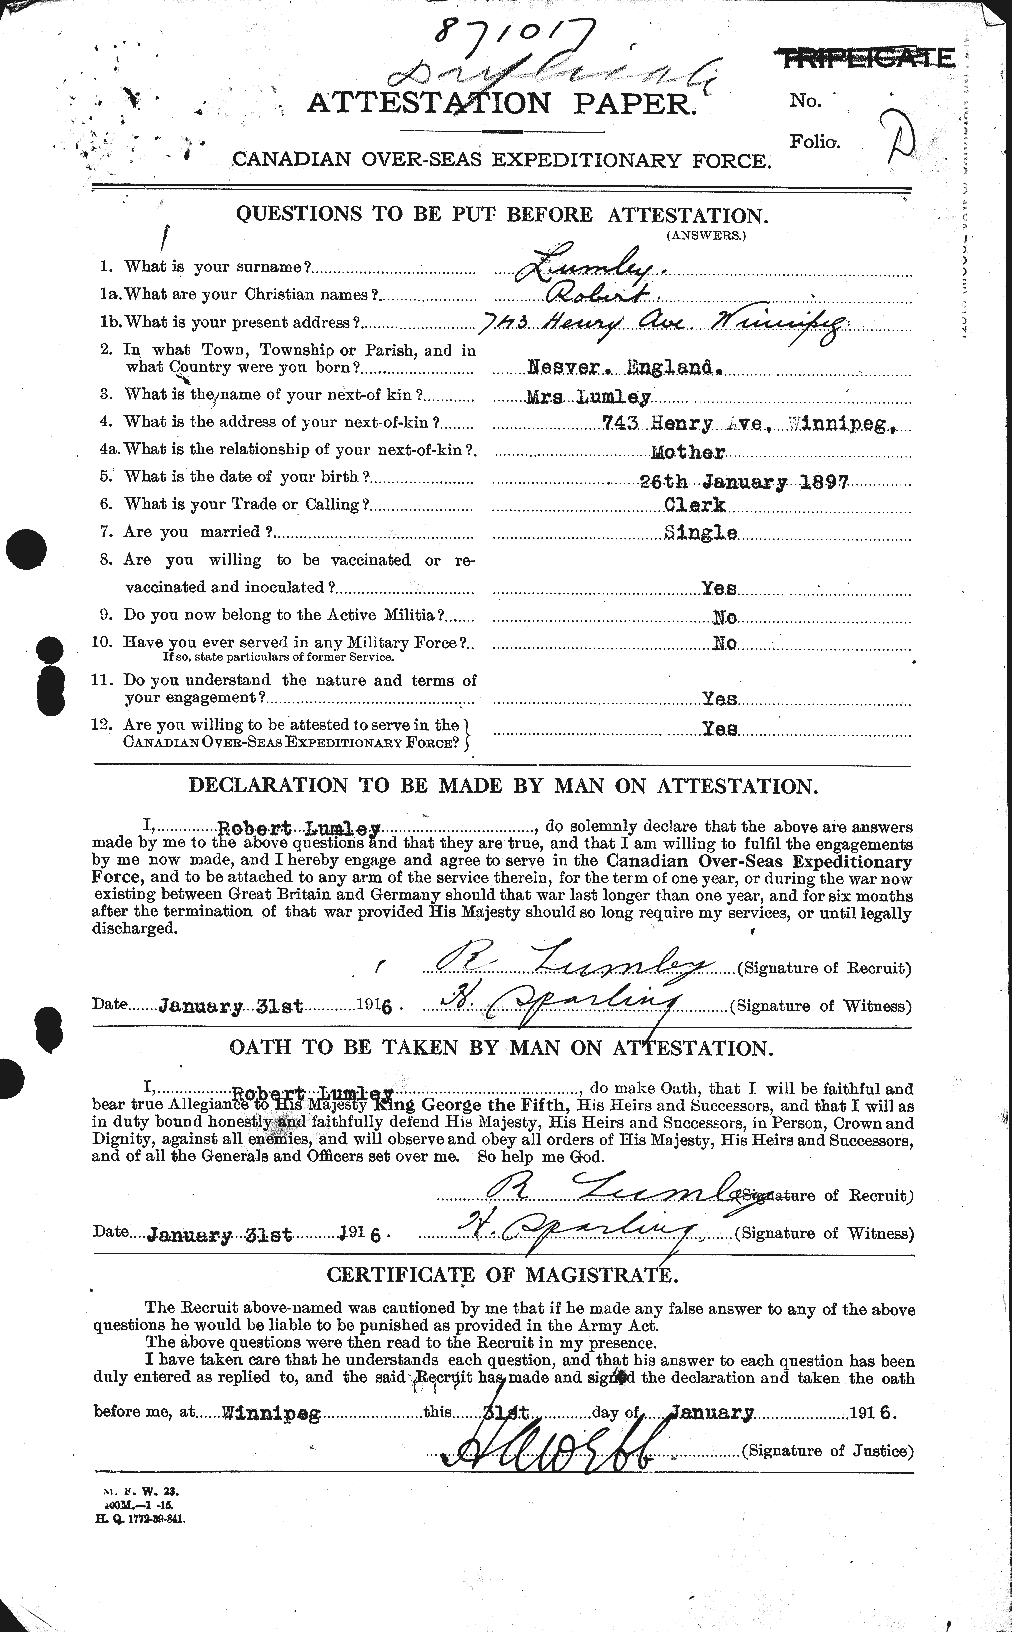 Personnel Records of the First World War - CEF 470816a